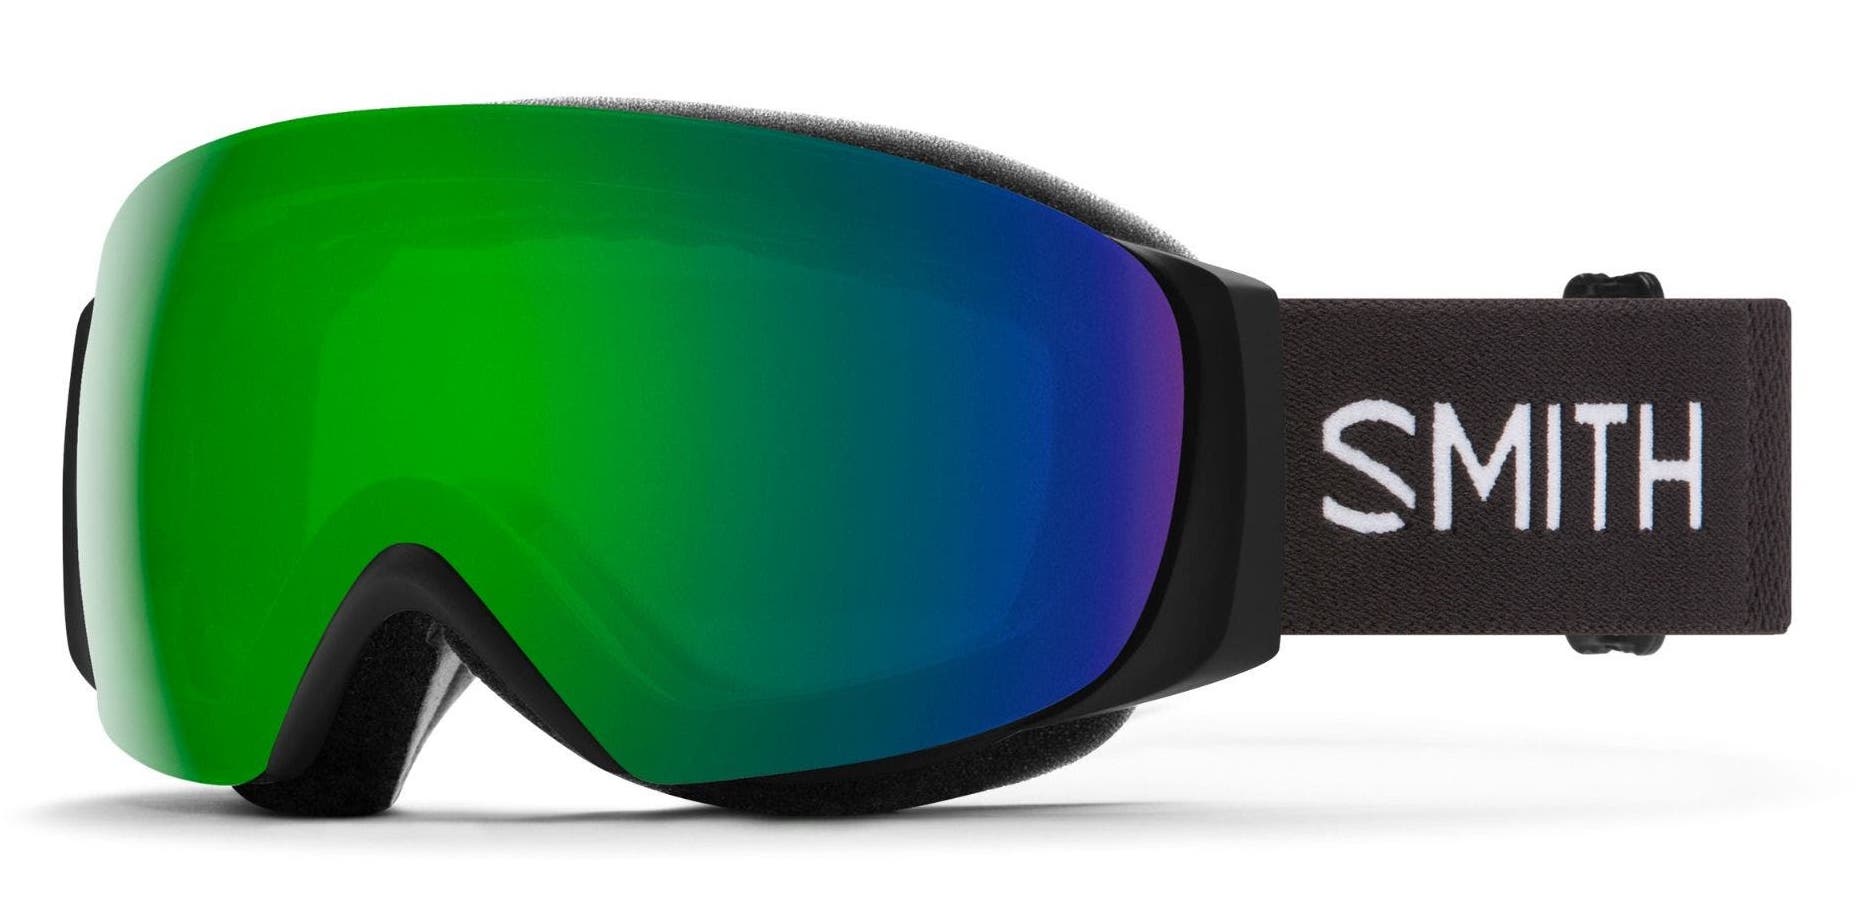 SMITH I/O MAG goggles for skiing and snowboarding. Black strap with white SMITH text and a green blue mirror shield lens.